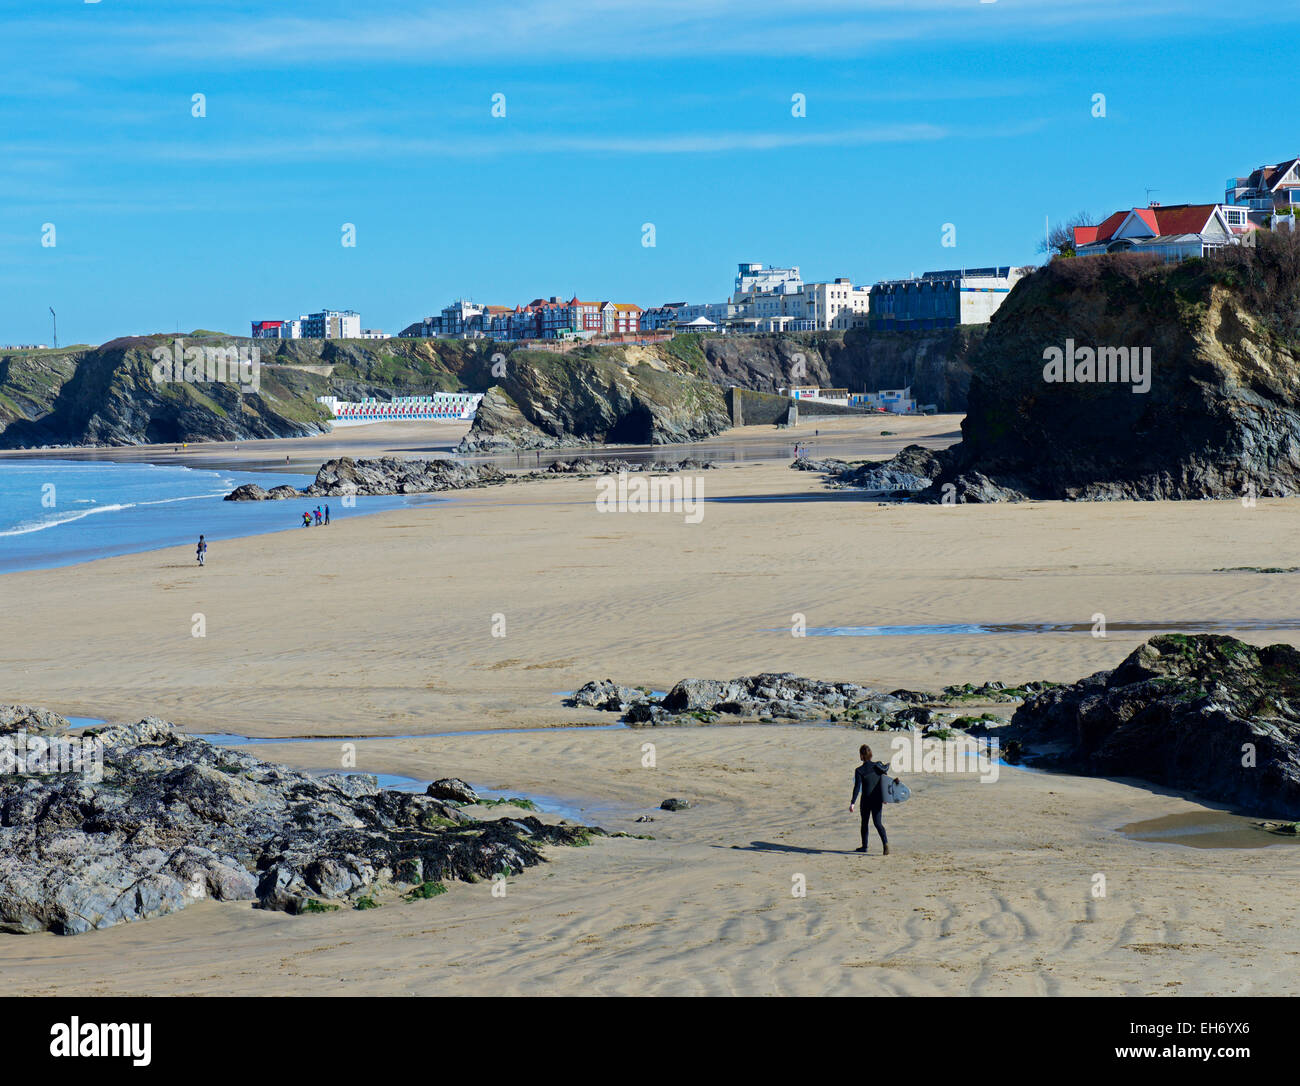 Man walking on the beach with surfboard, Newquay, Cornwall, England UK Stock Photo